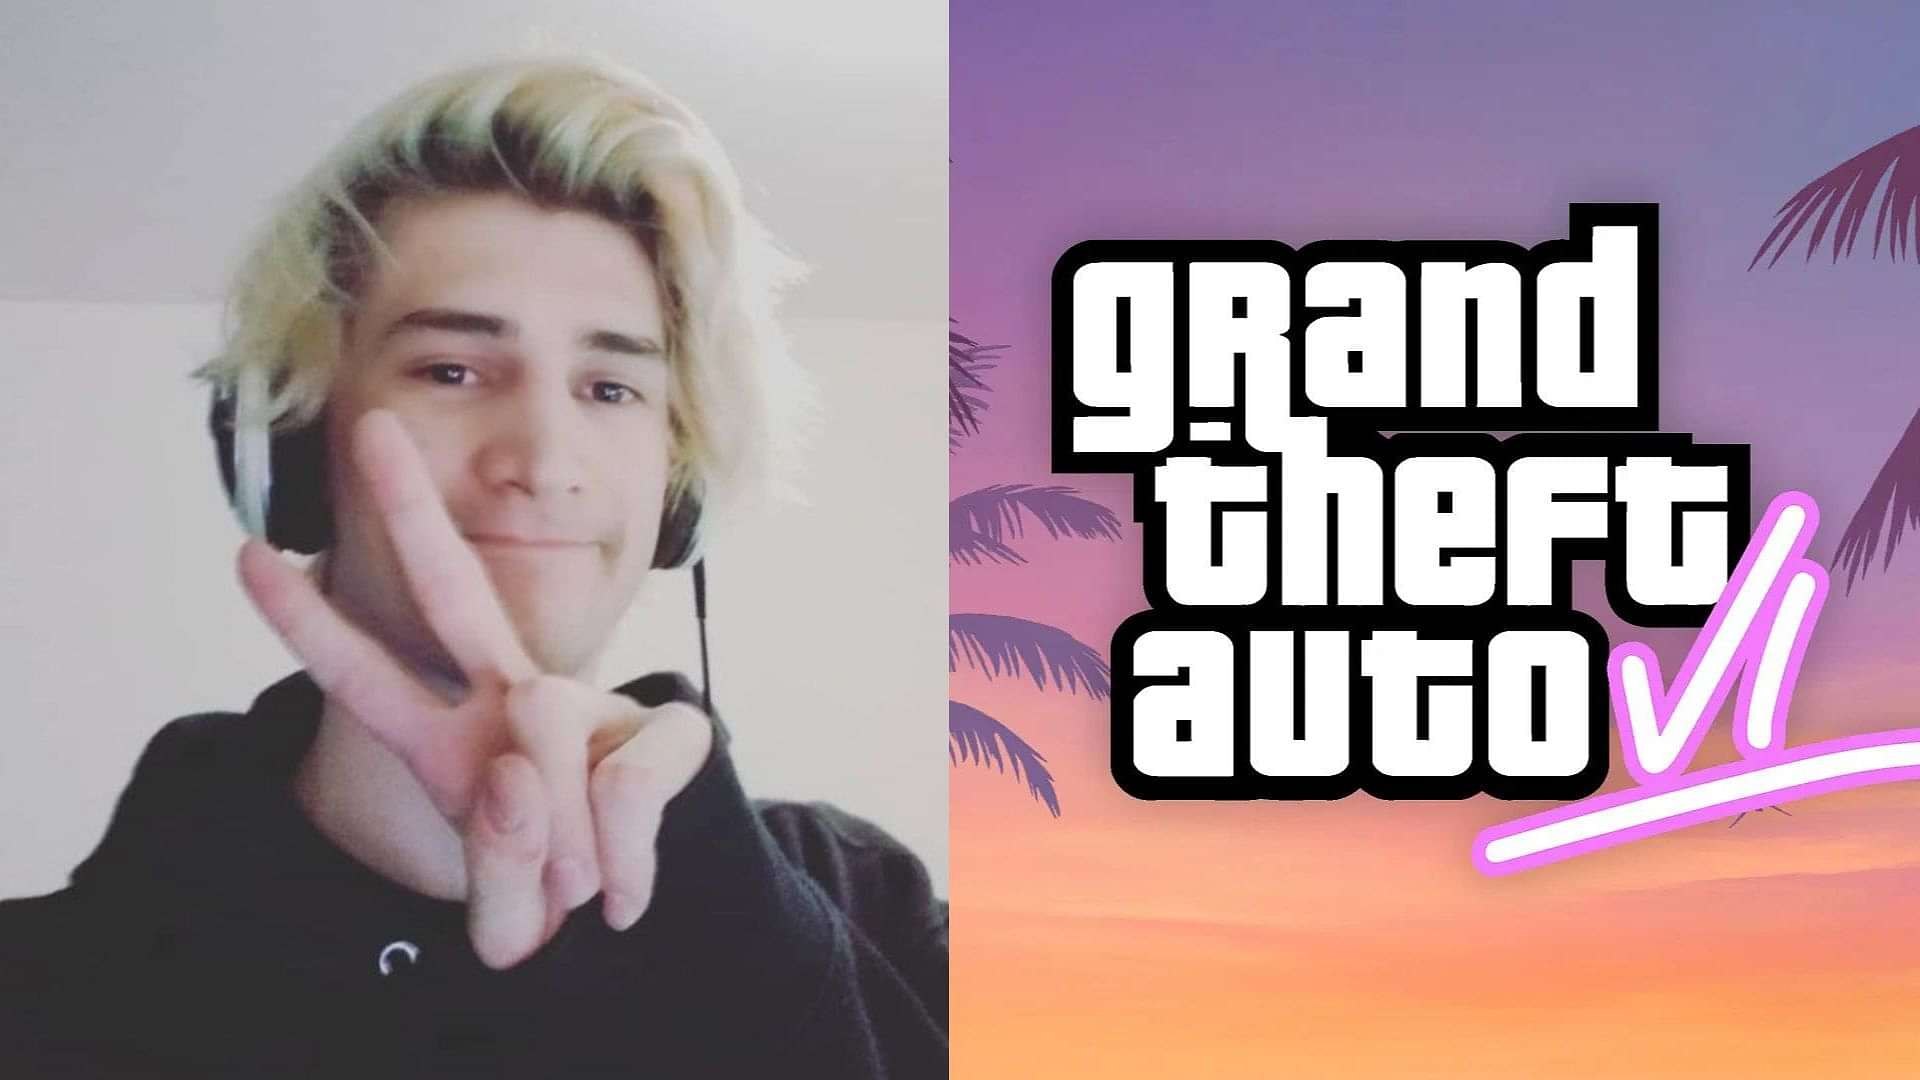 I TRIED SOME WORST GTA - 6 Games from PlayStore!! 